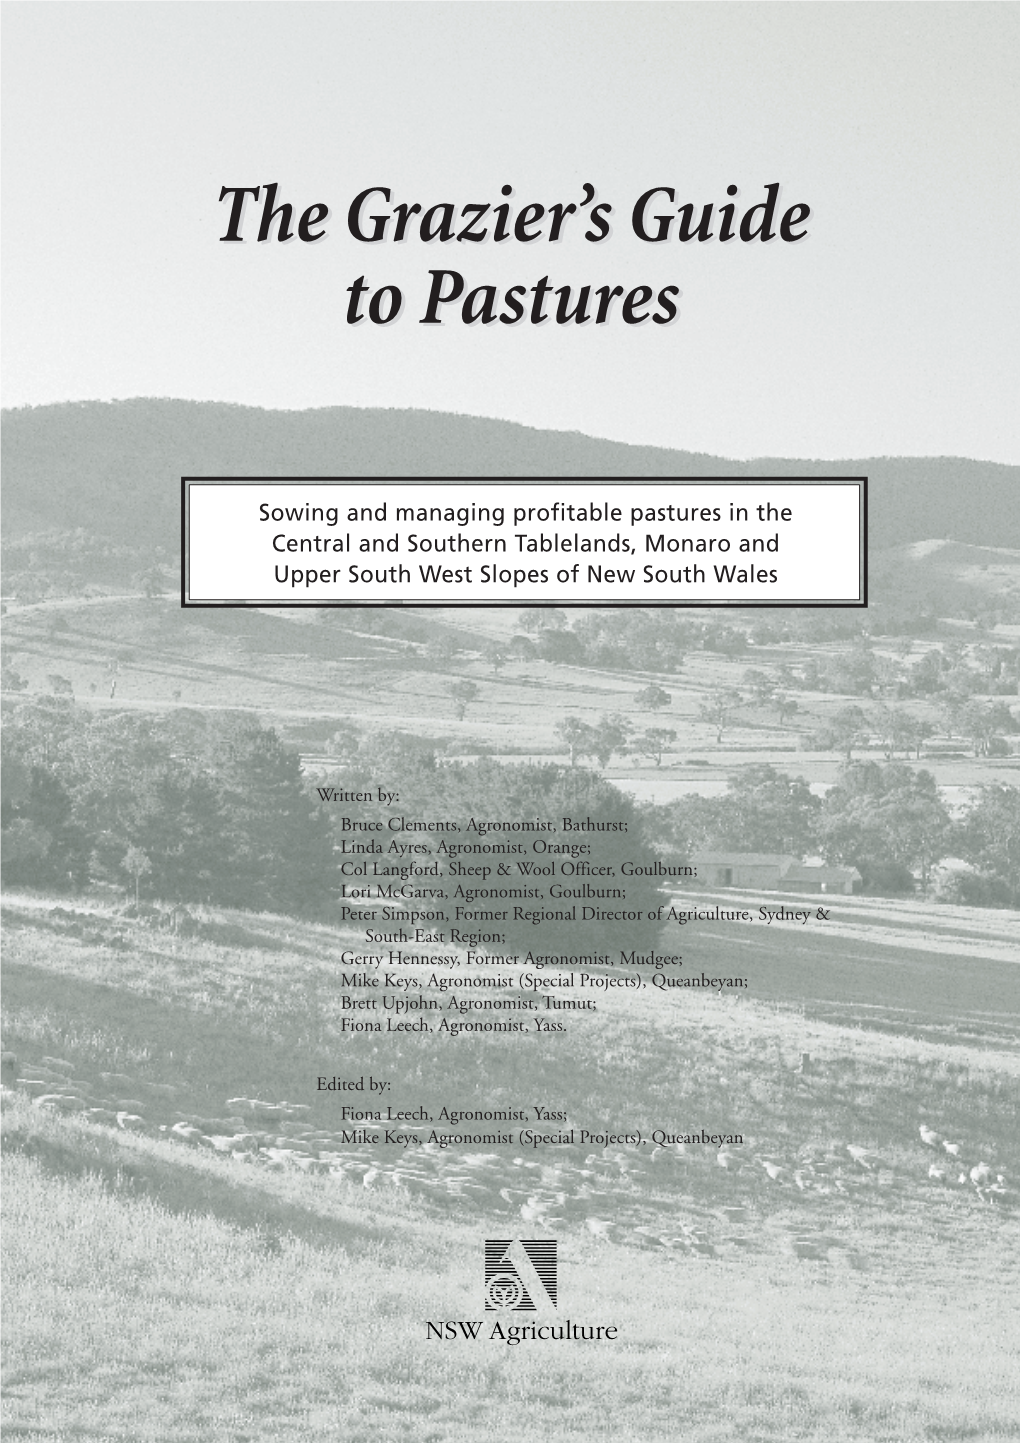 The Grazier's Guide to Pastures